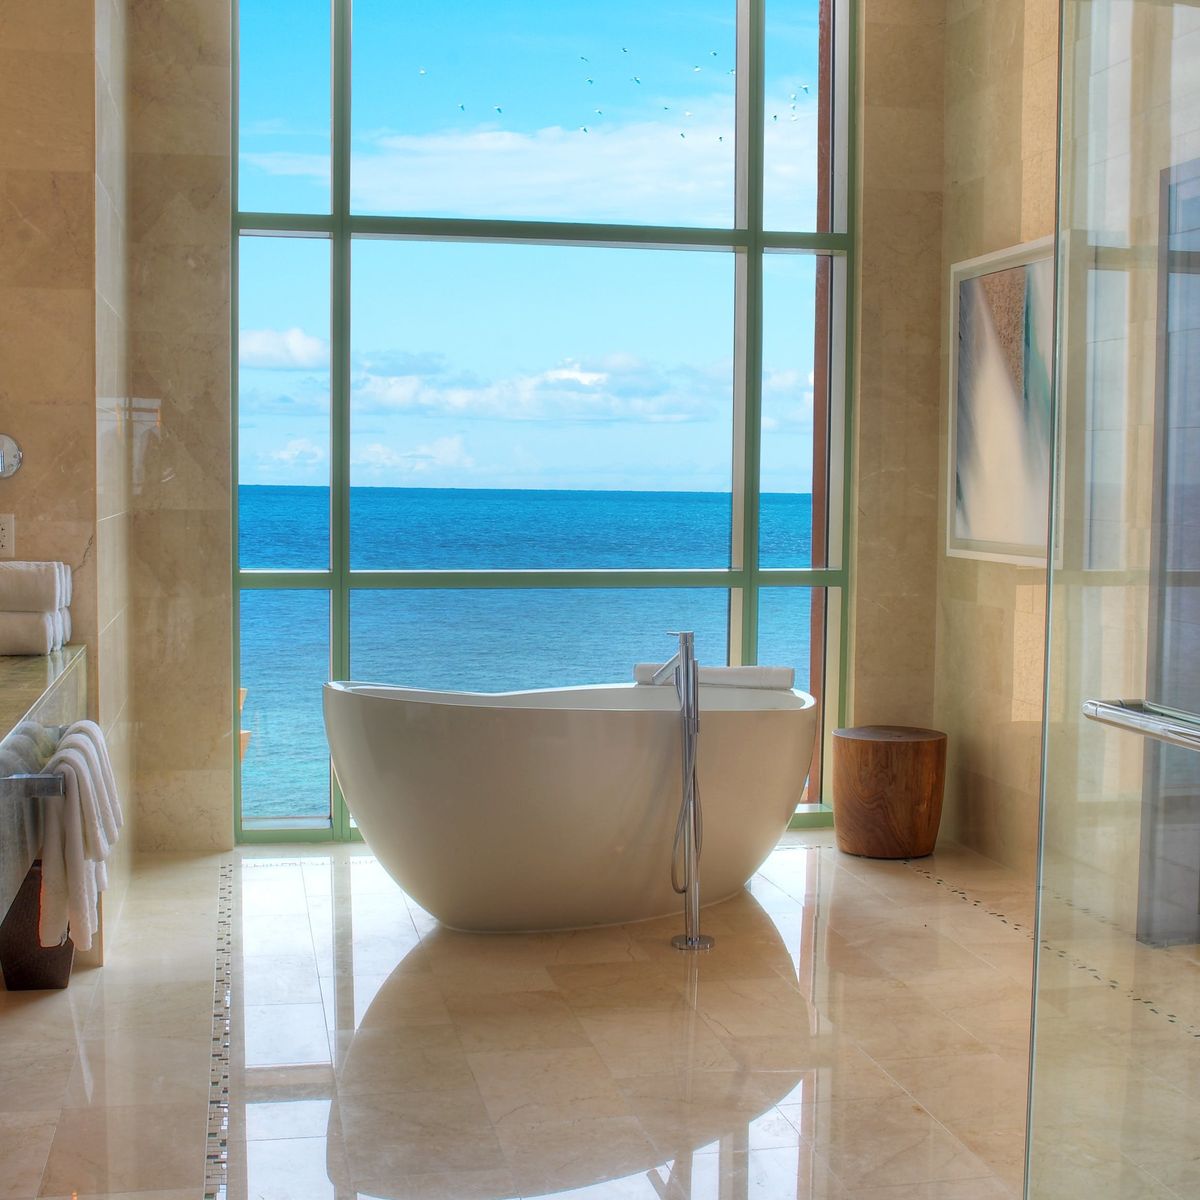 35 Stunning Hotel Bathrooms You’ll Want to Spend Your Entire Vacation In